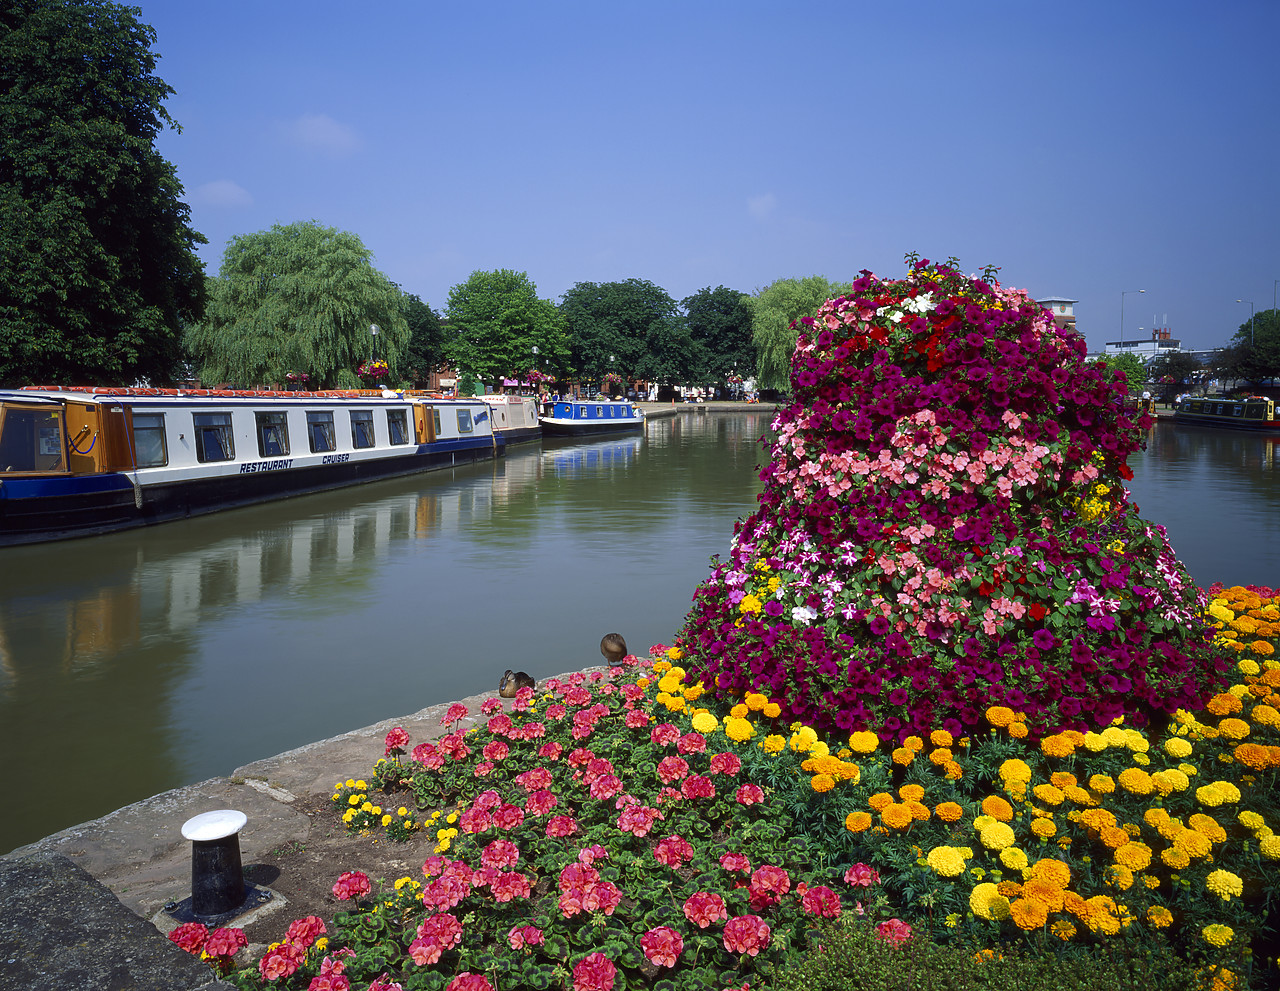 #944809-2 - Flower Bed & Canal Boats, Stratford-upon-Avon, Warwickshire, England